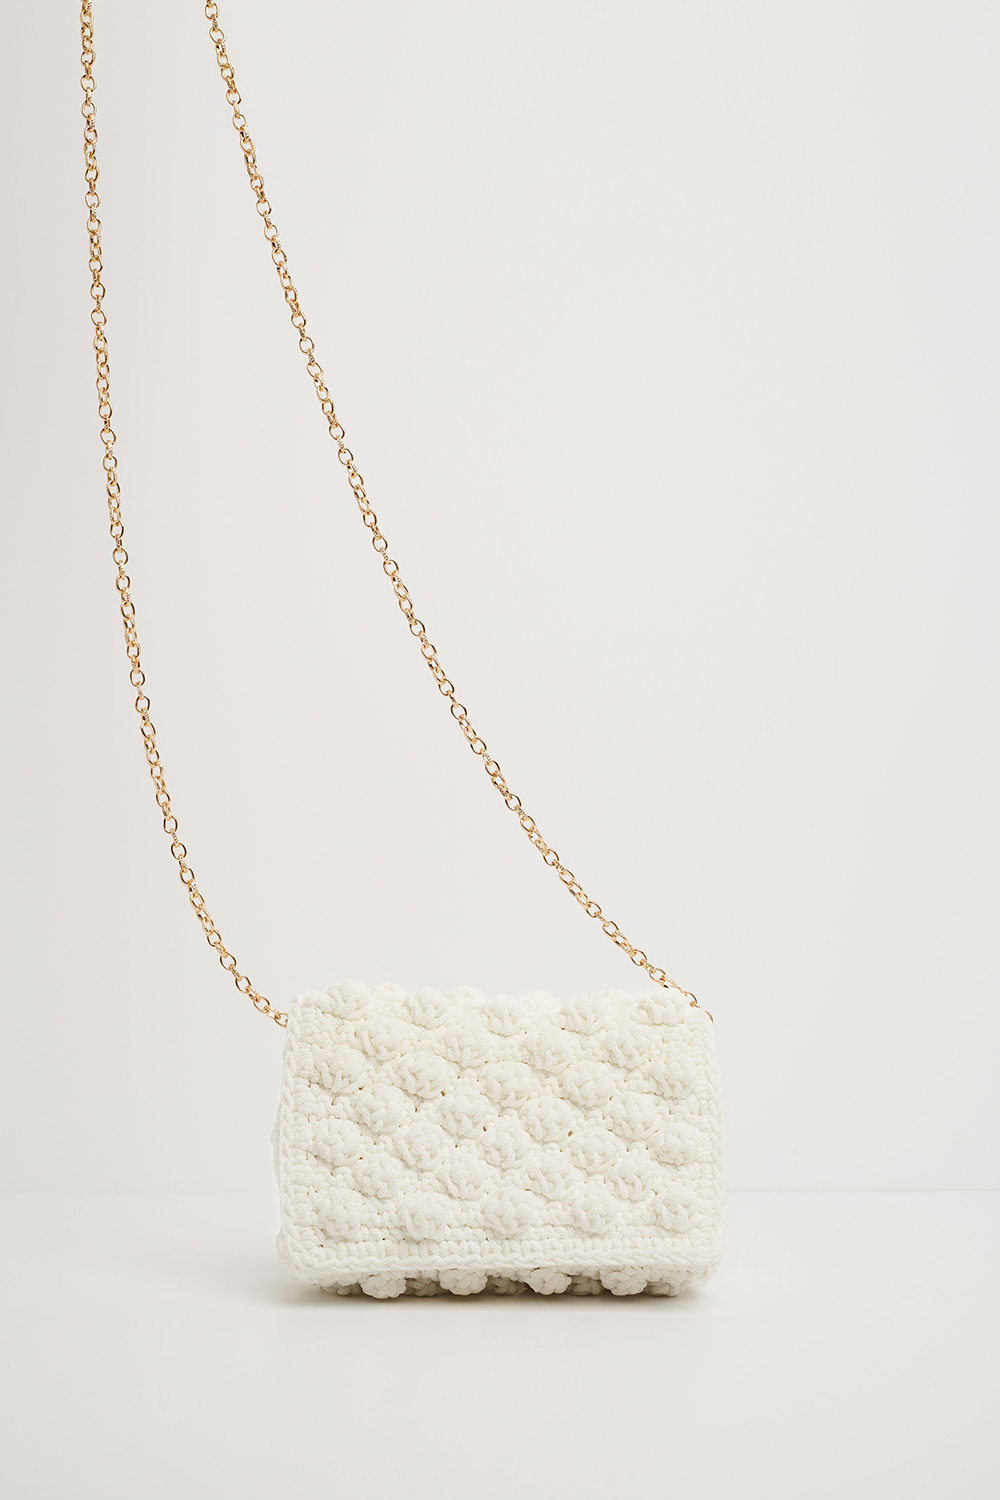 101 / XS Mini bag with bubbles in white